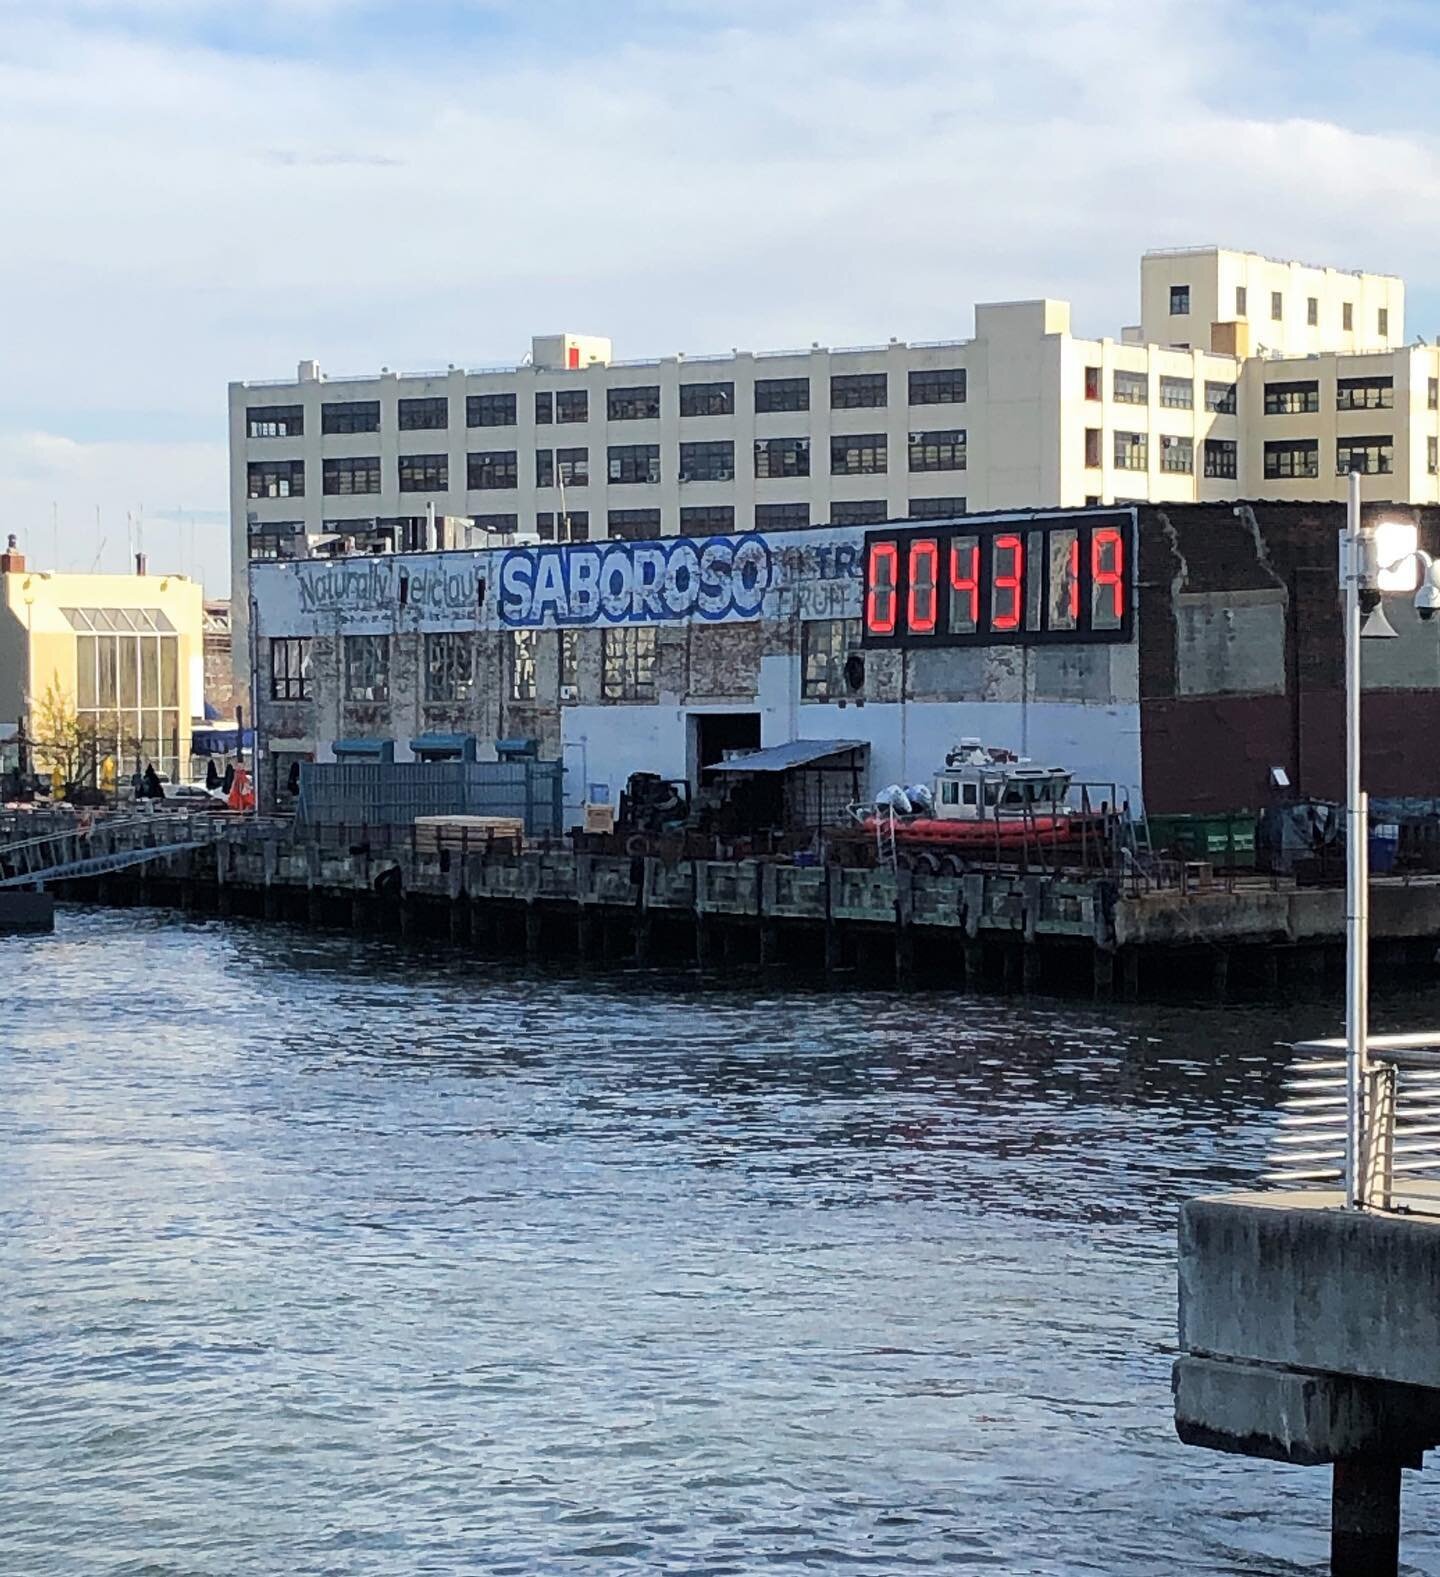 The official countdown to the end of the Trump presidency as seen from @nyc_ferry this morning.

Digital clock by artist @bstosuy and others. 

#byedon